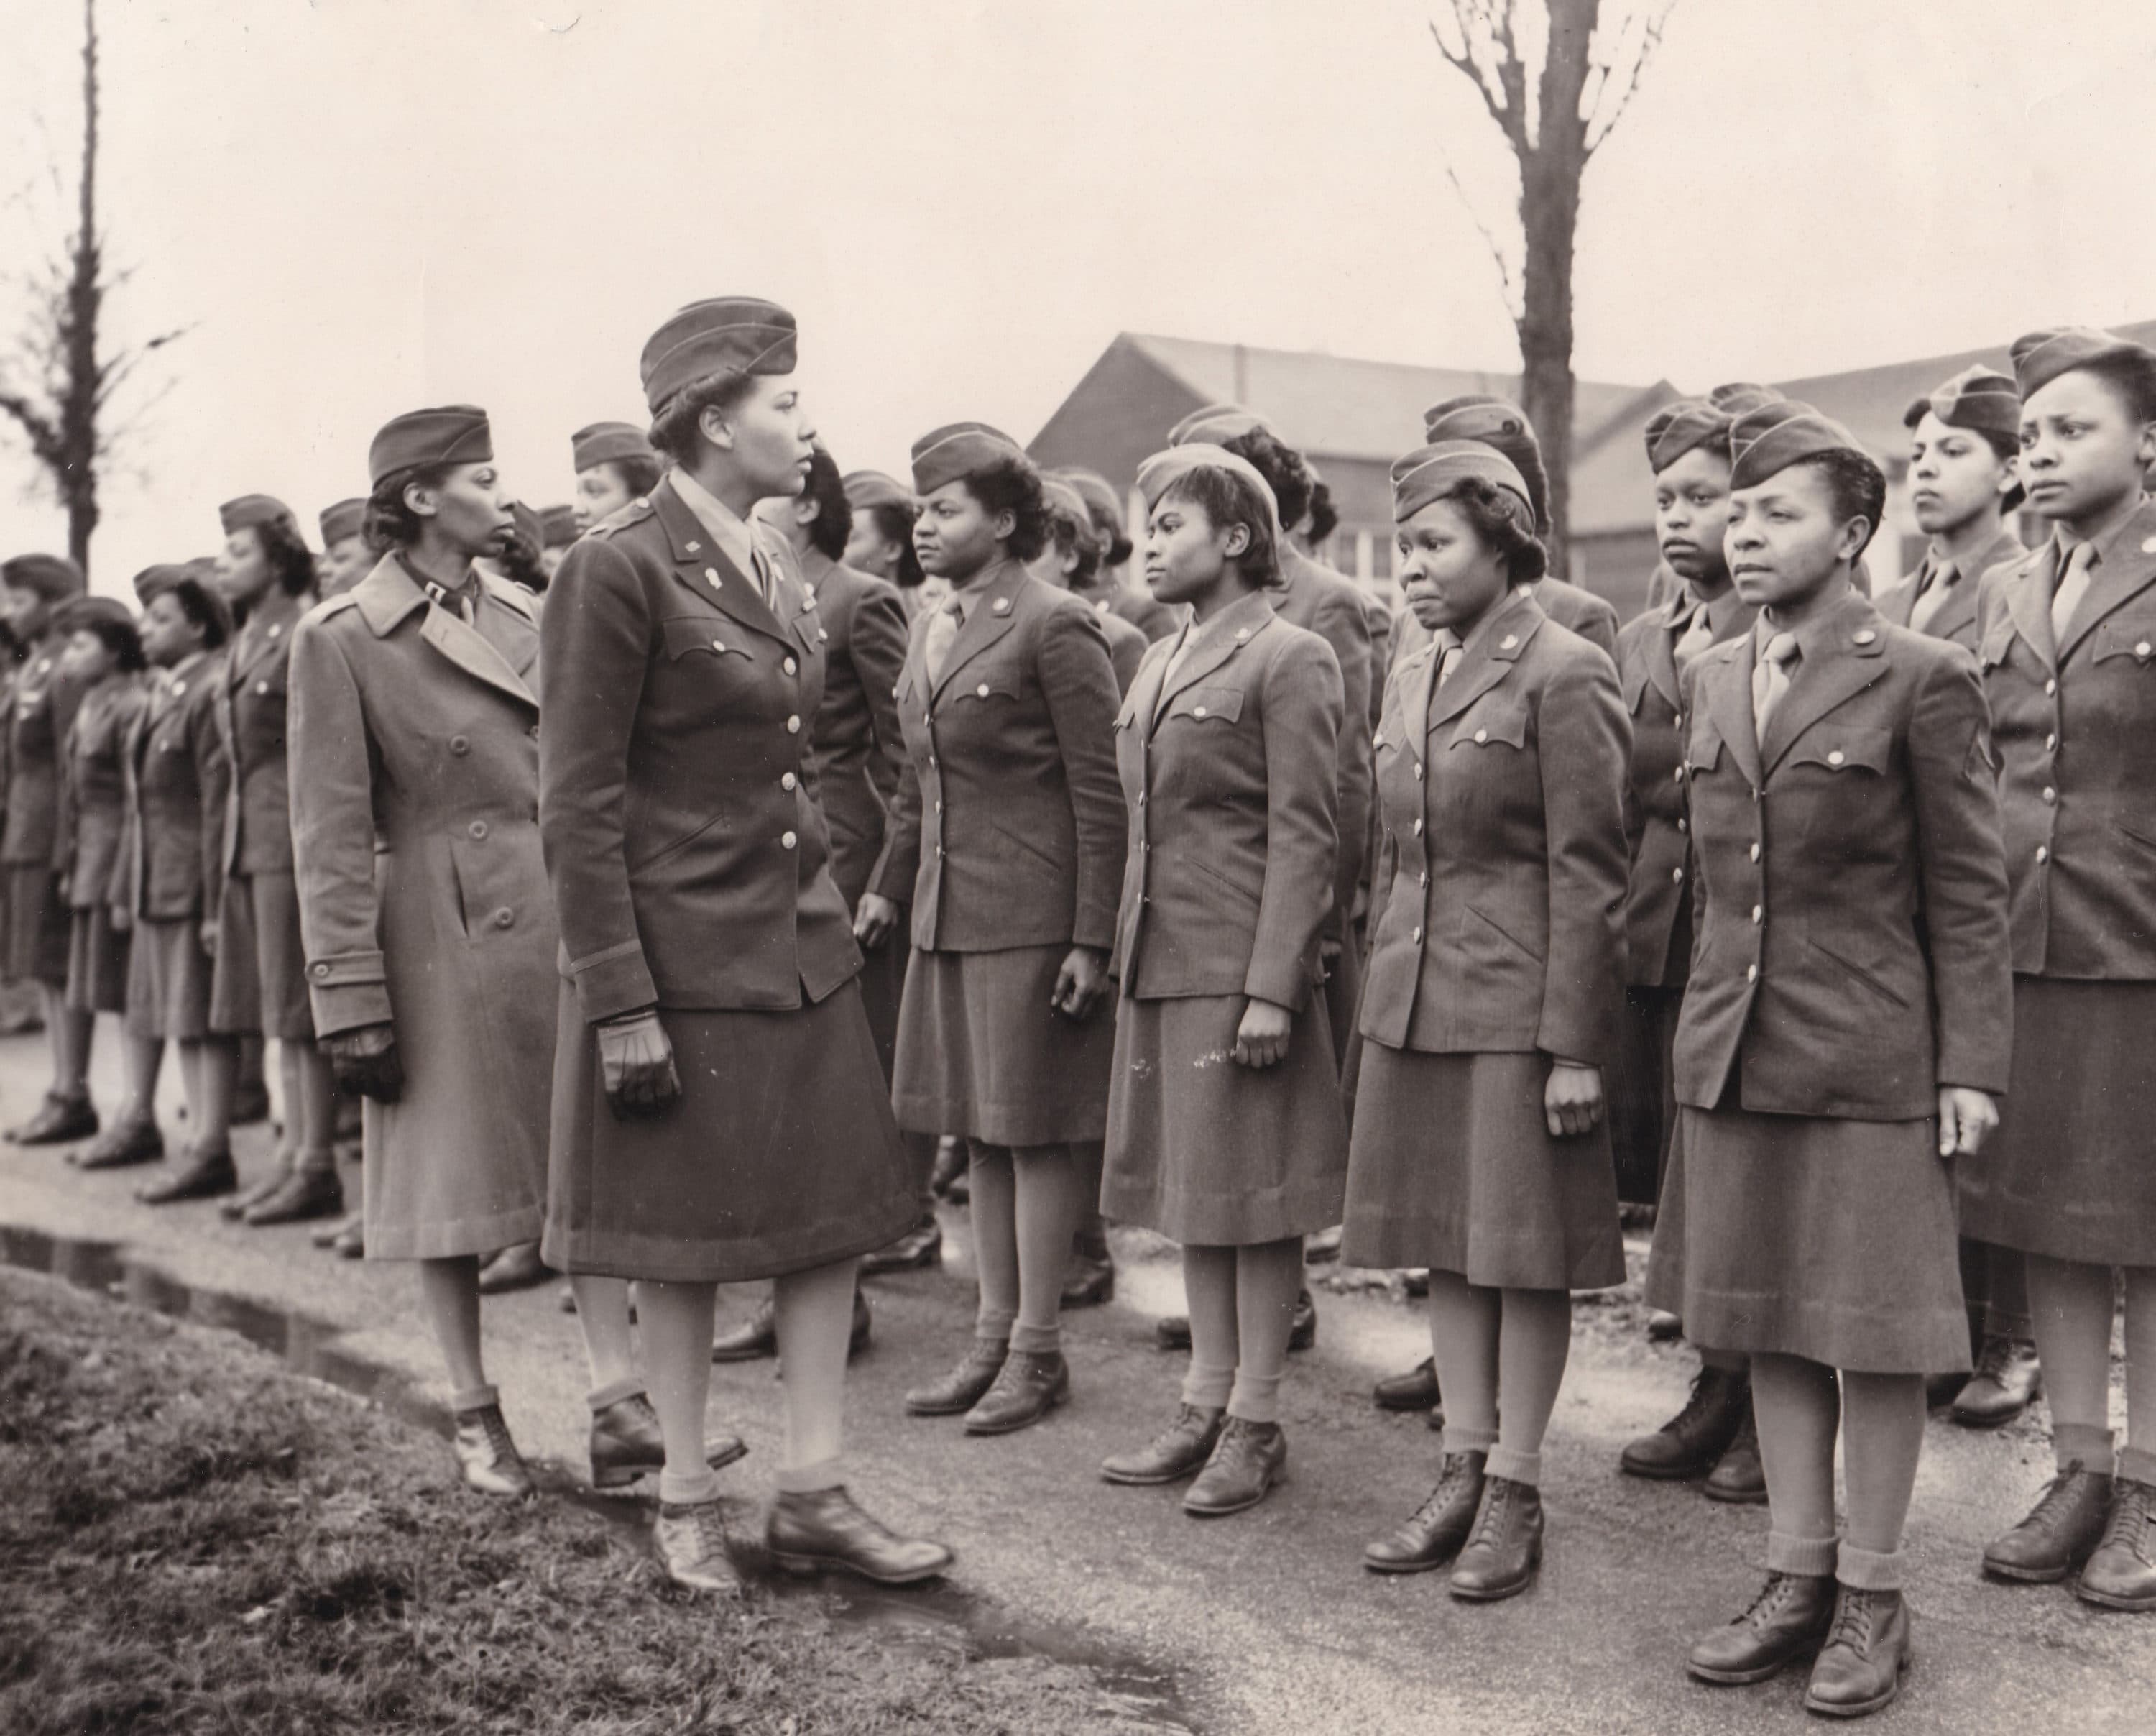 In this photo provided by the U.S. Army Women's Museum, members of the 6888th battalion stand in formation in Birmingham, England, in 1945. The Women's Army Corps battalion made history as the only all-female Black unit to serve in Europe during World War II. (U.S. Army Women's Museum via AP, File)